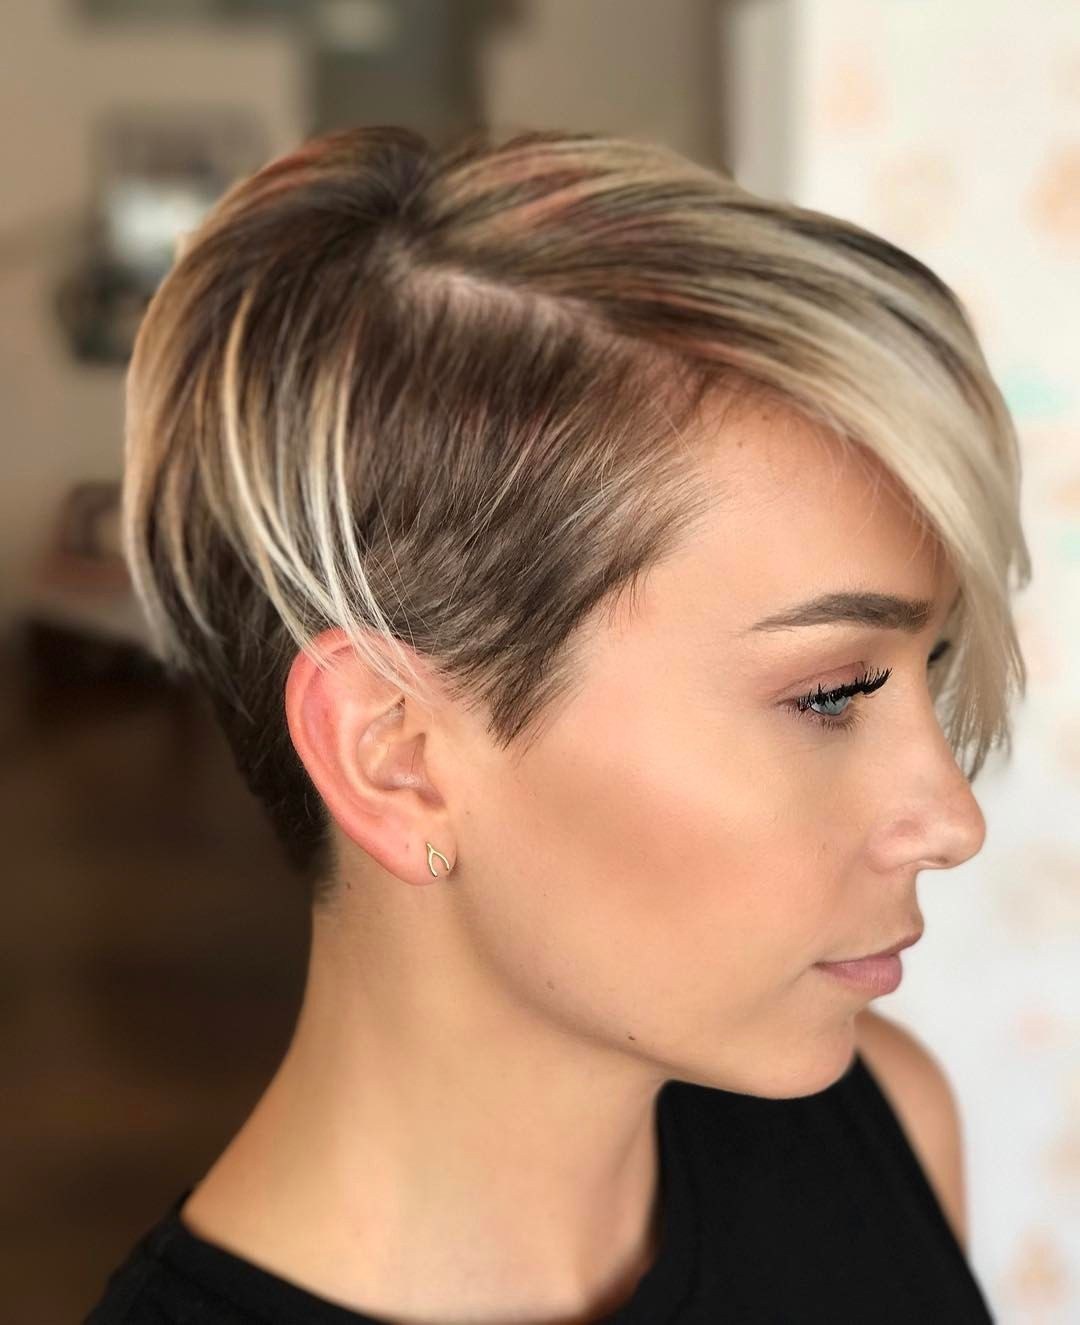 Top Ten Latest Pixie Hairstyles That You Should Try - Fashionre